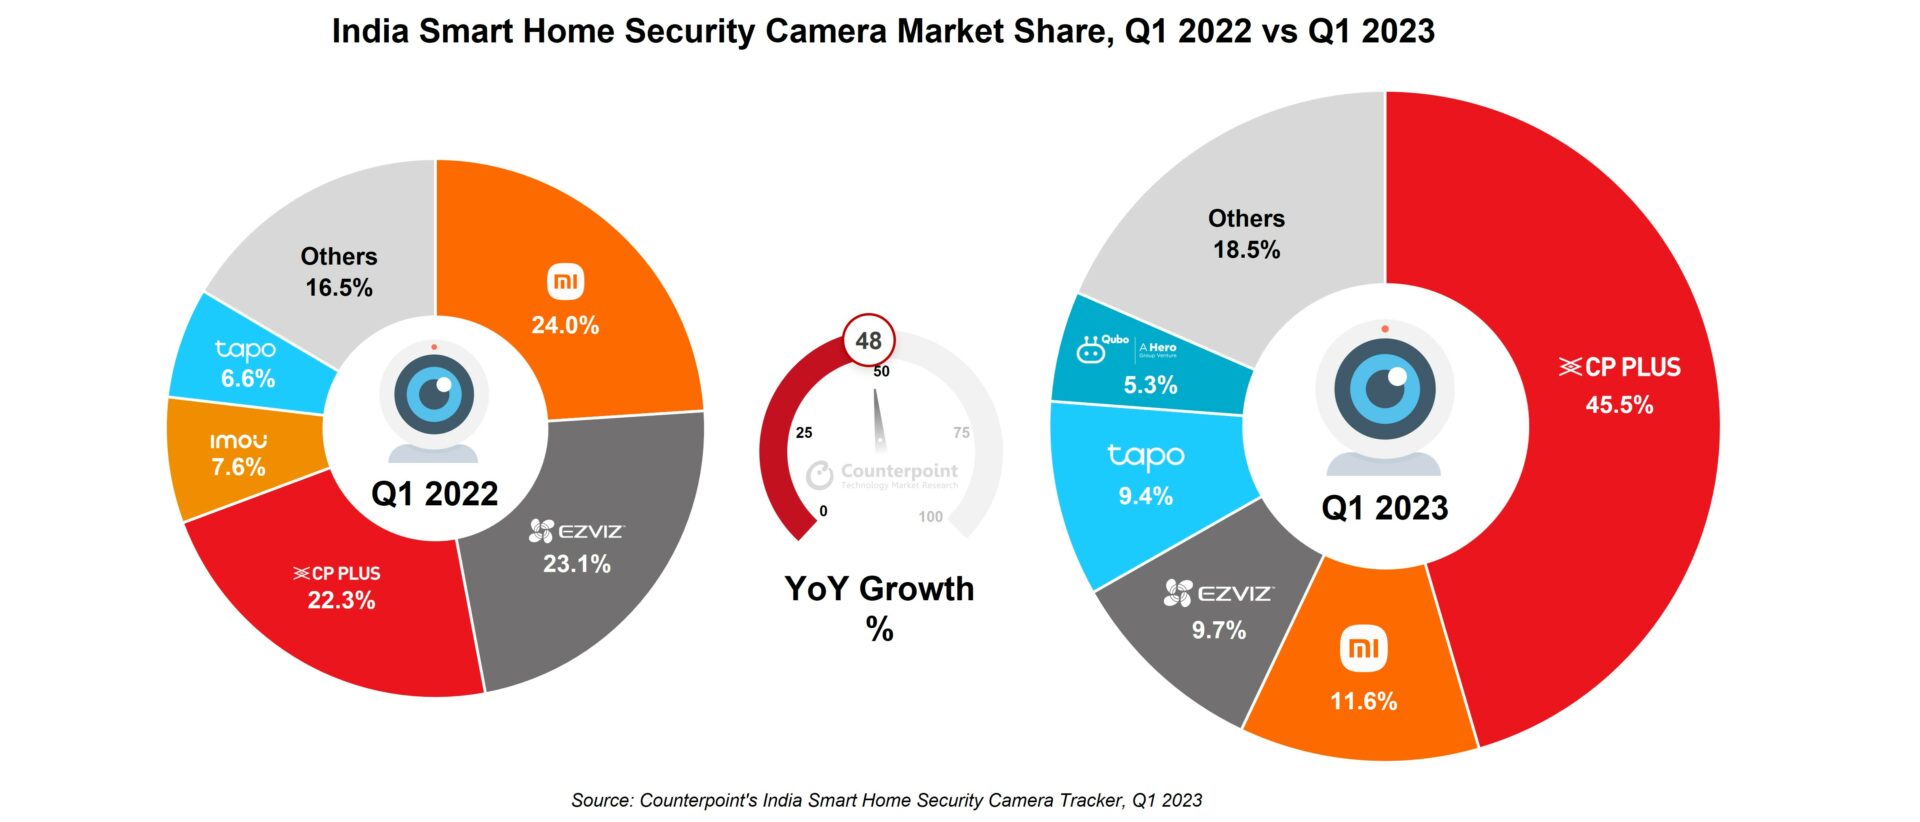 India Smart Home Security Camera Market Share, Q1 2022 vs Q1 2023, Counterpoint Research